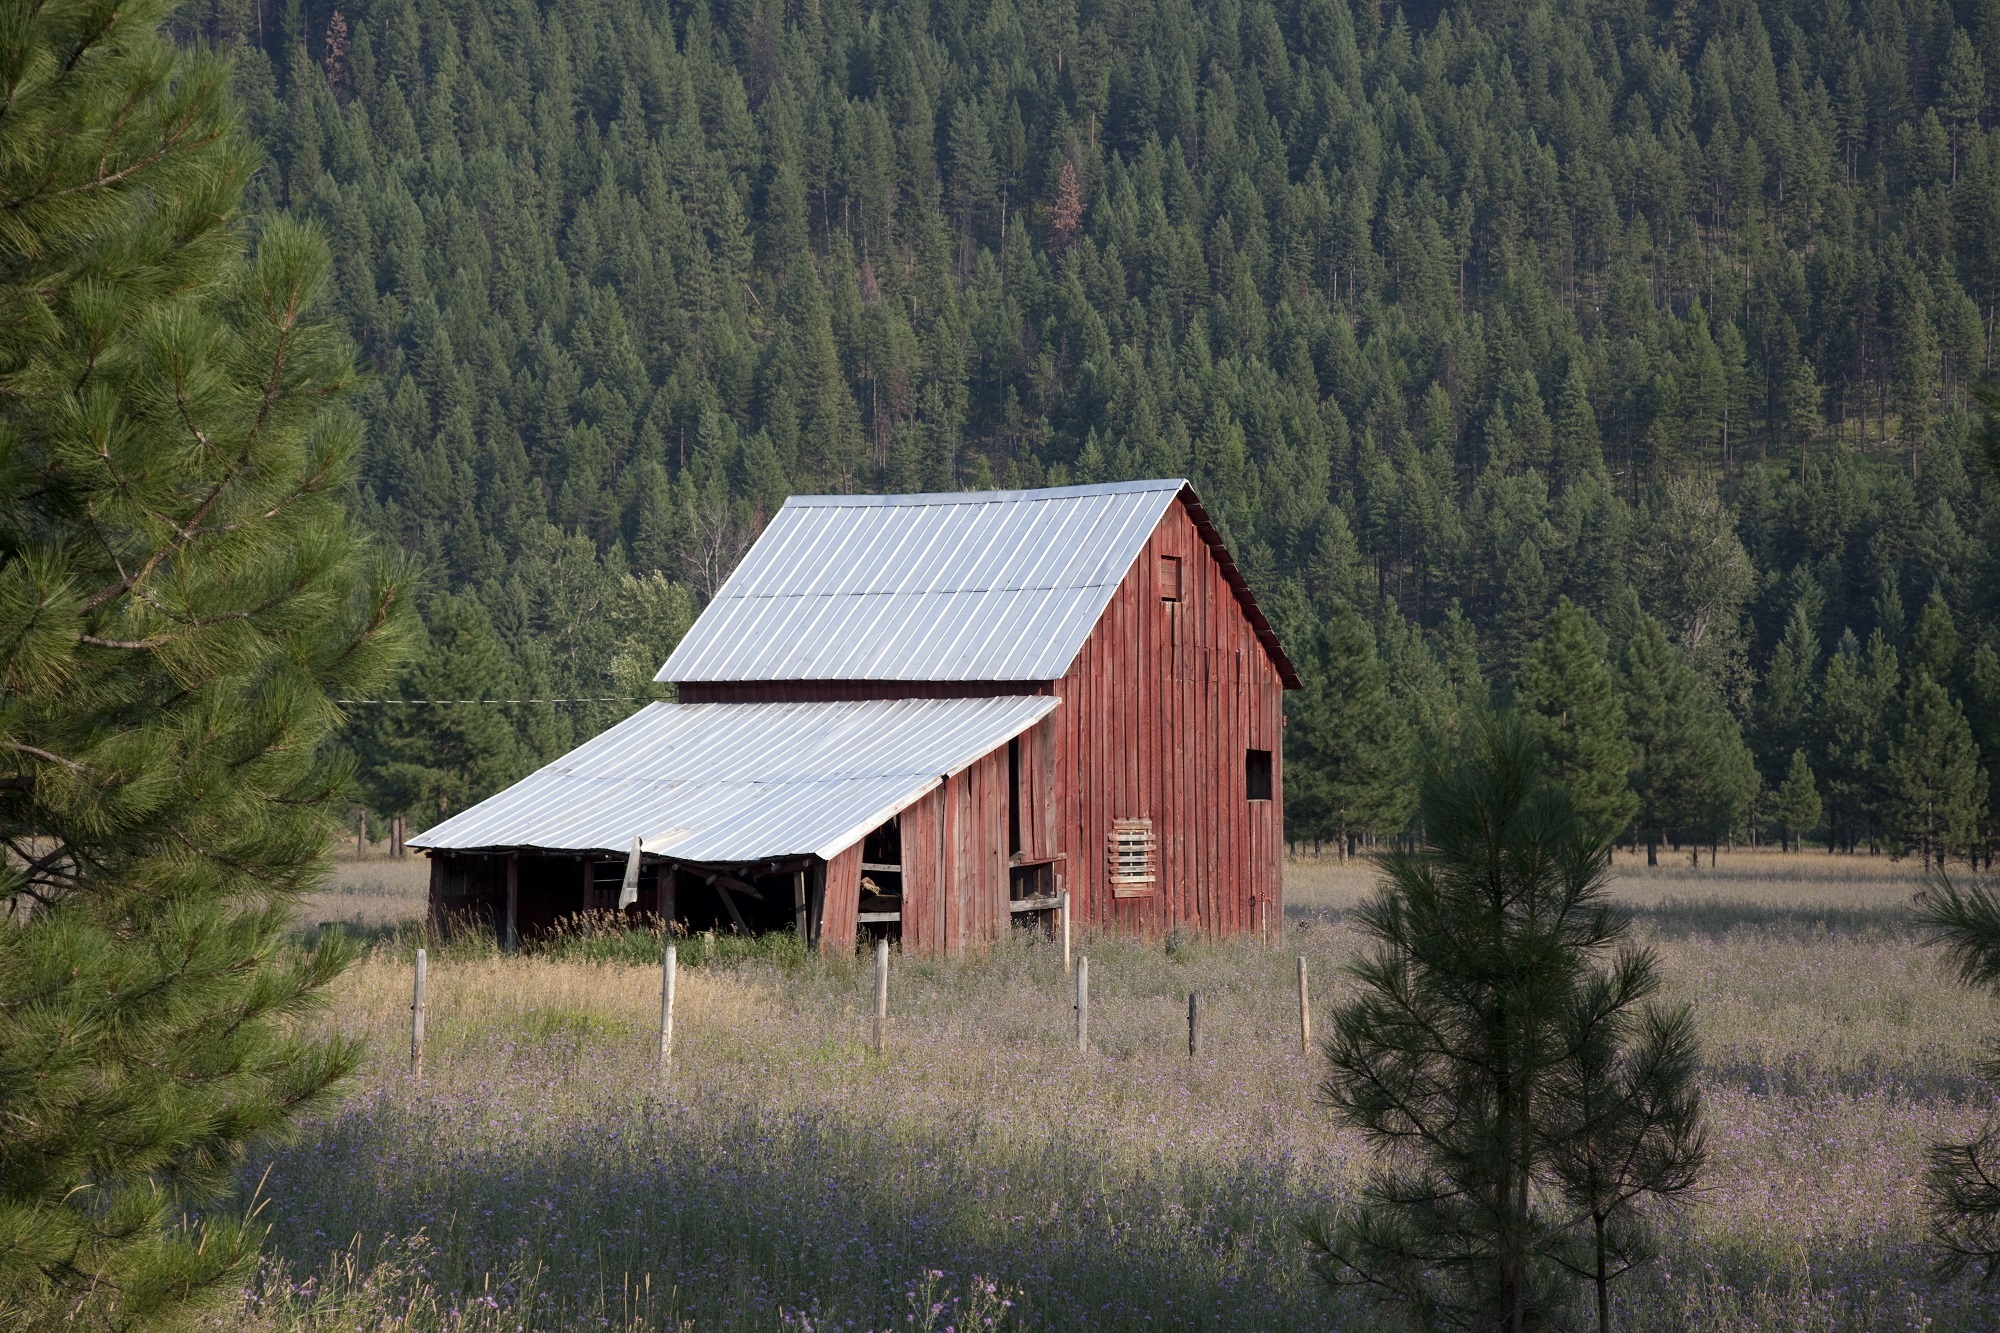 Wooden Barn, Architecture, Barn, Construction, Forest, HQ Photo